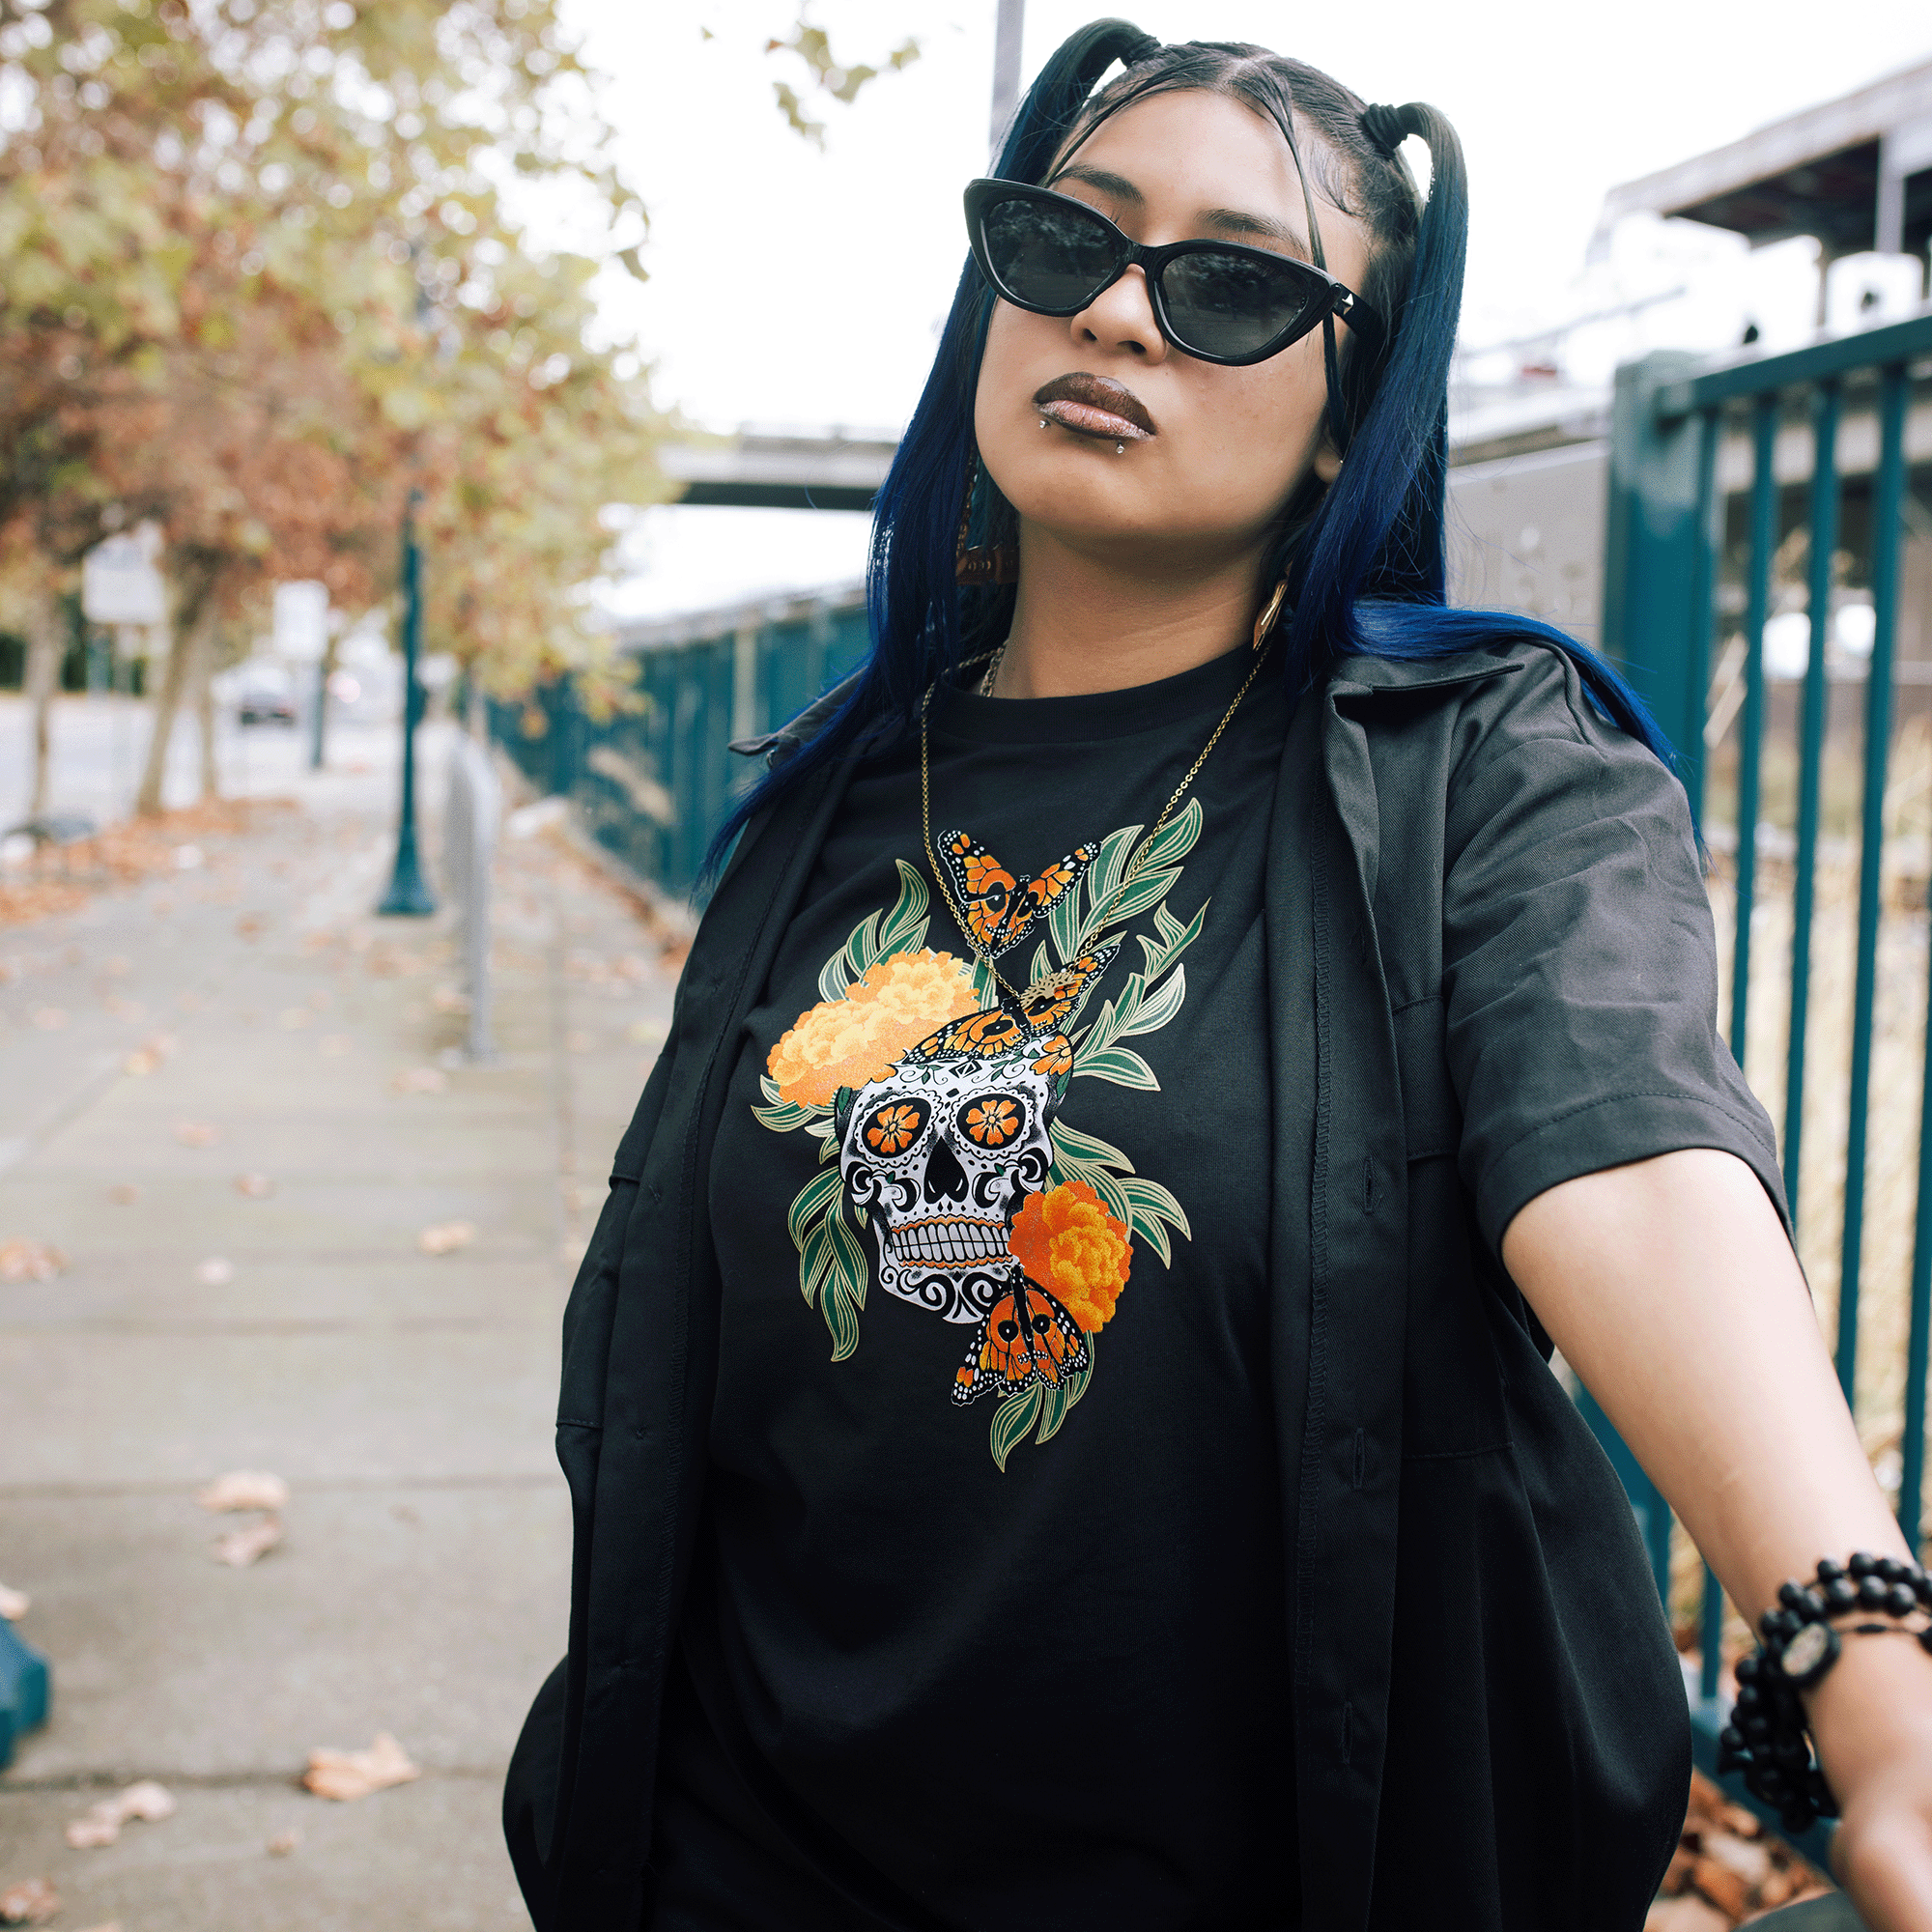 Female model wearing black t-shirt with graphic art by Oakland artist Jet Martinez depicting a sugar skull surrounded by Marigolds and Monarch butterflies with over shirt.